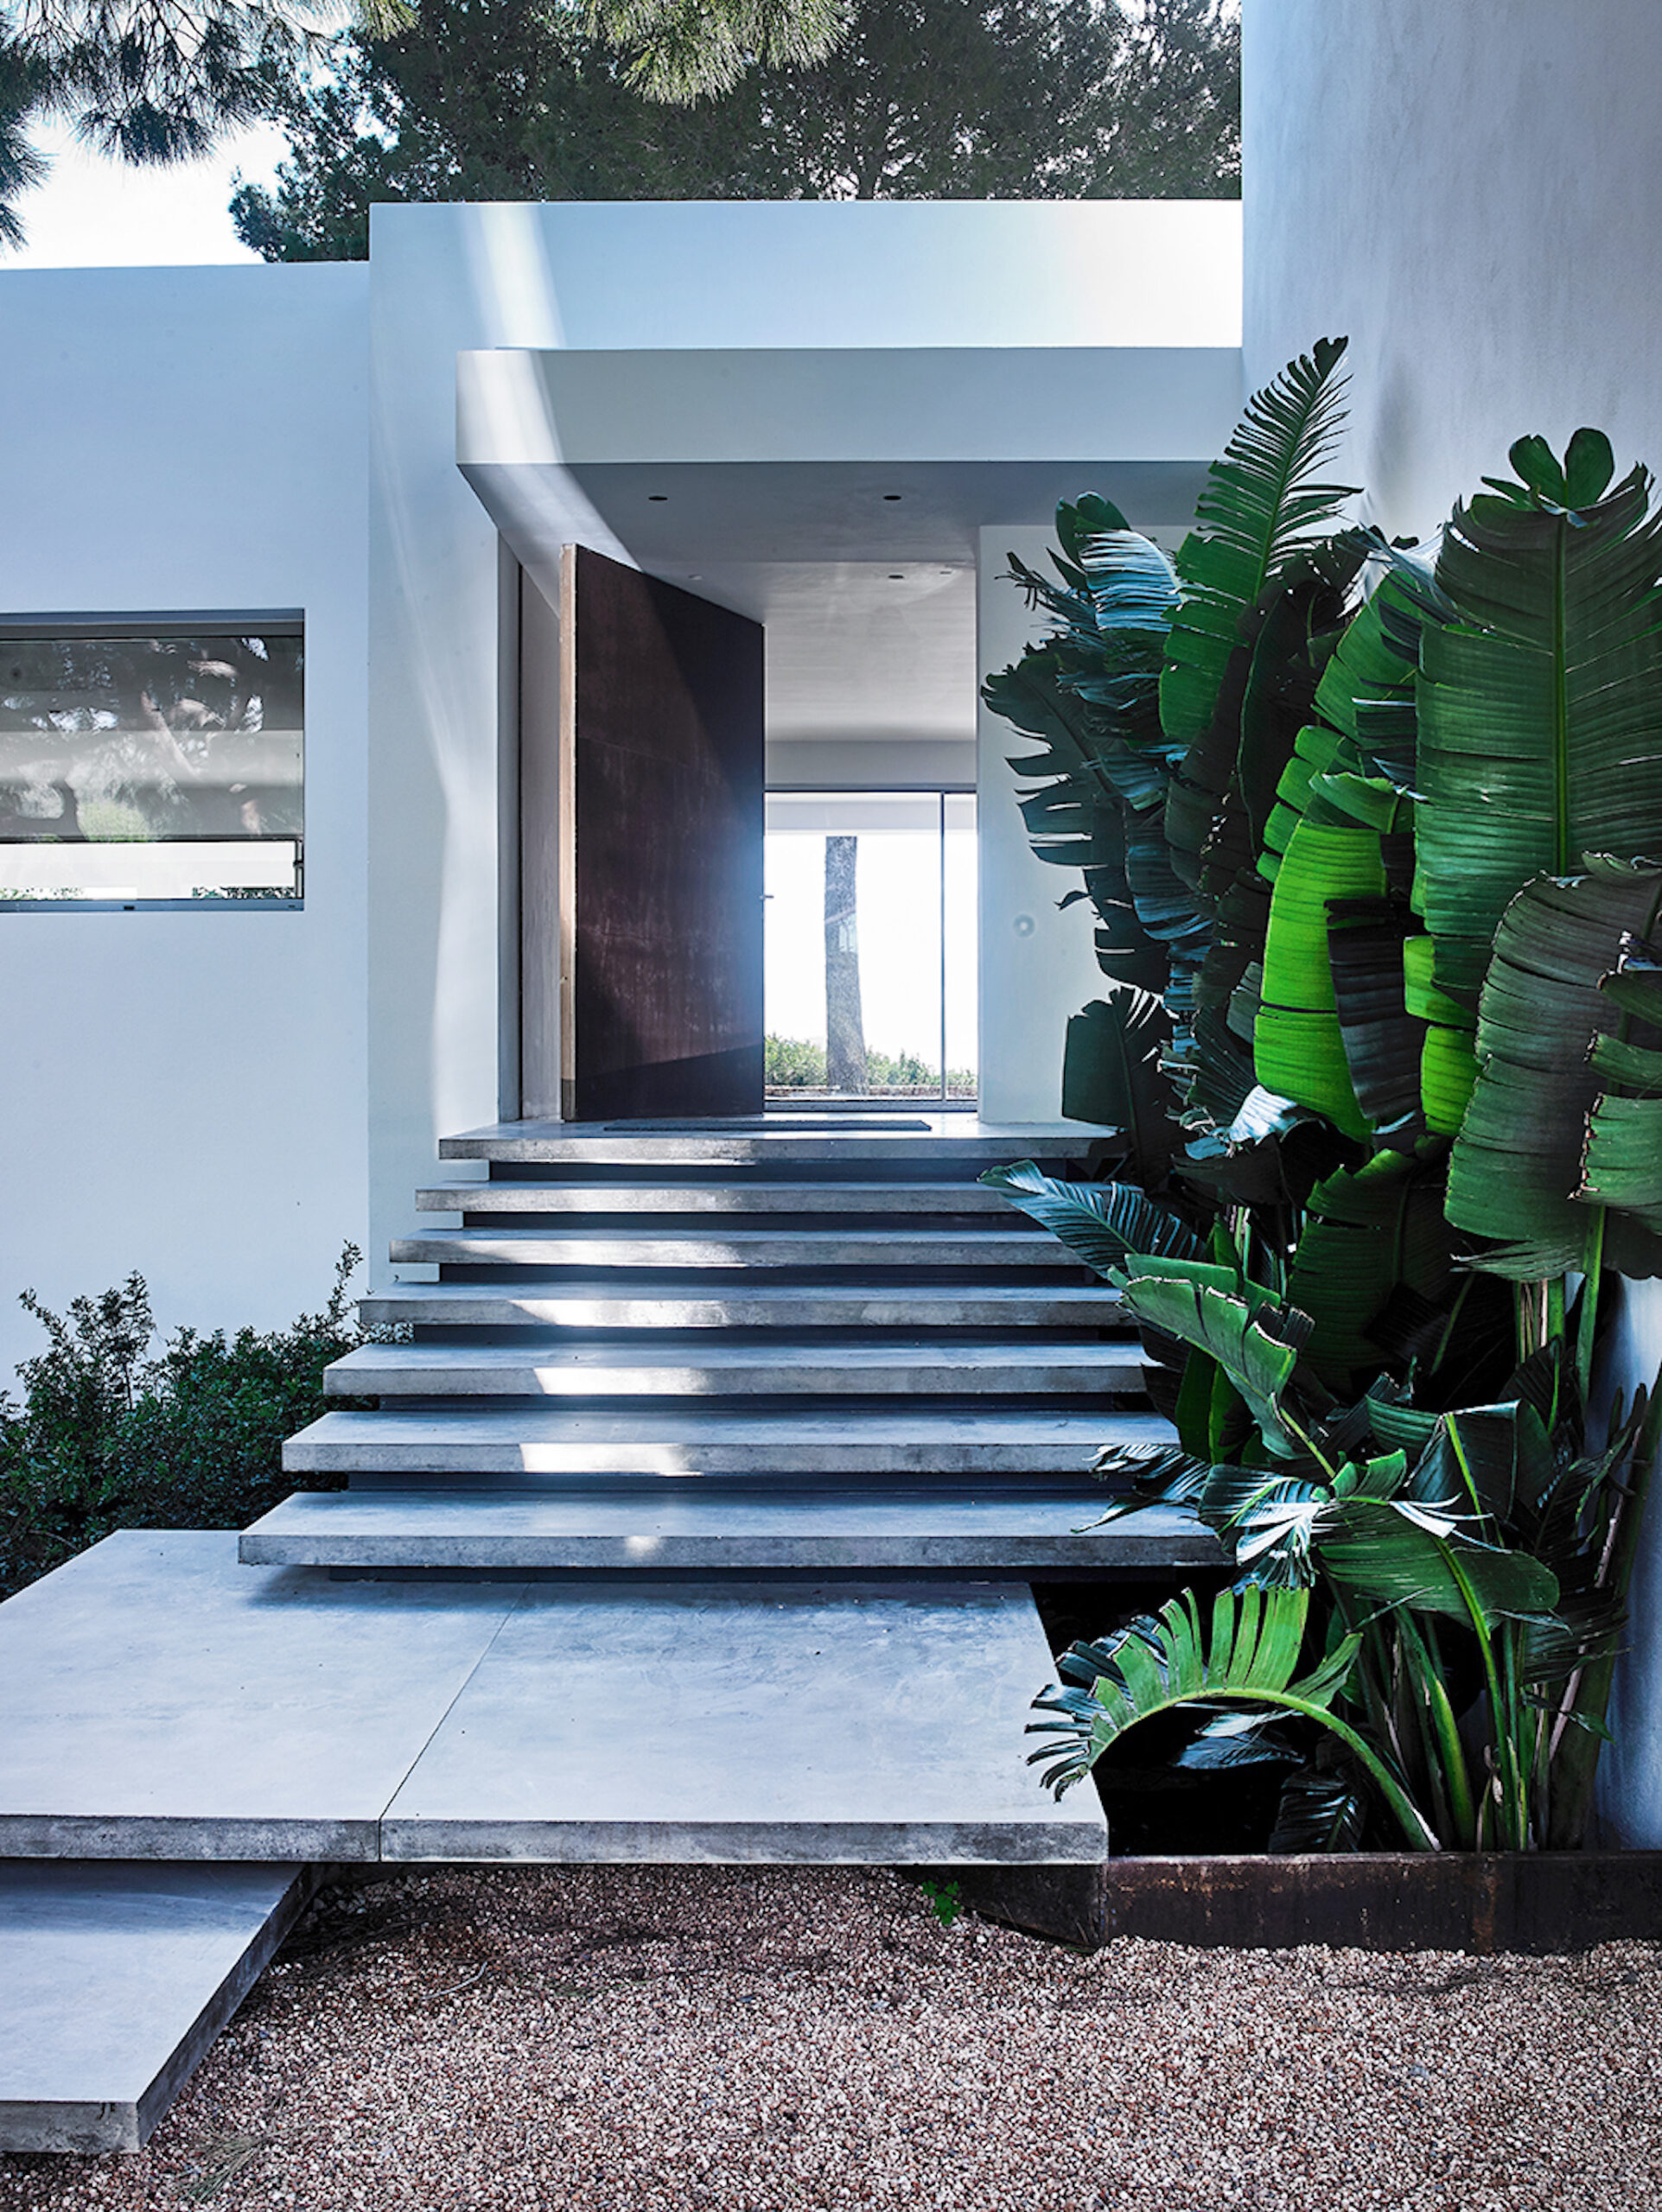 The entrance of a luxurious, white-painted villa in Ibiza